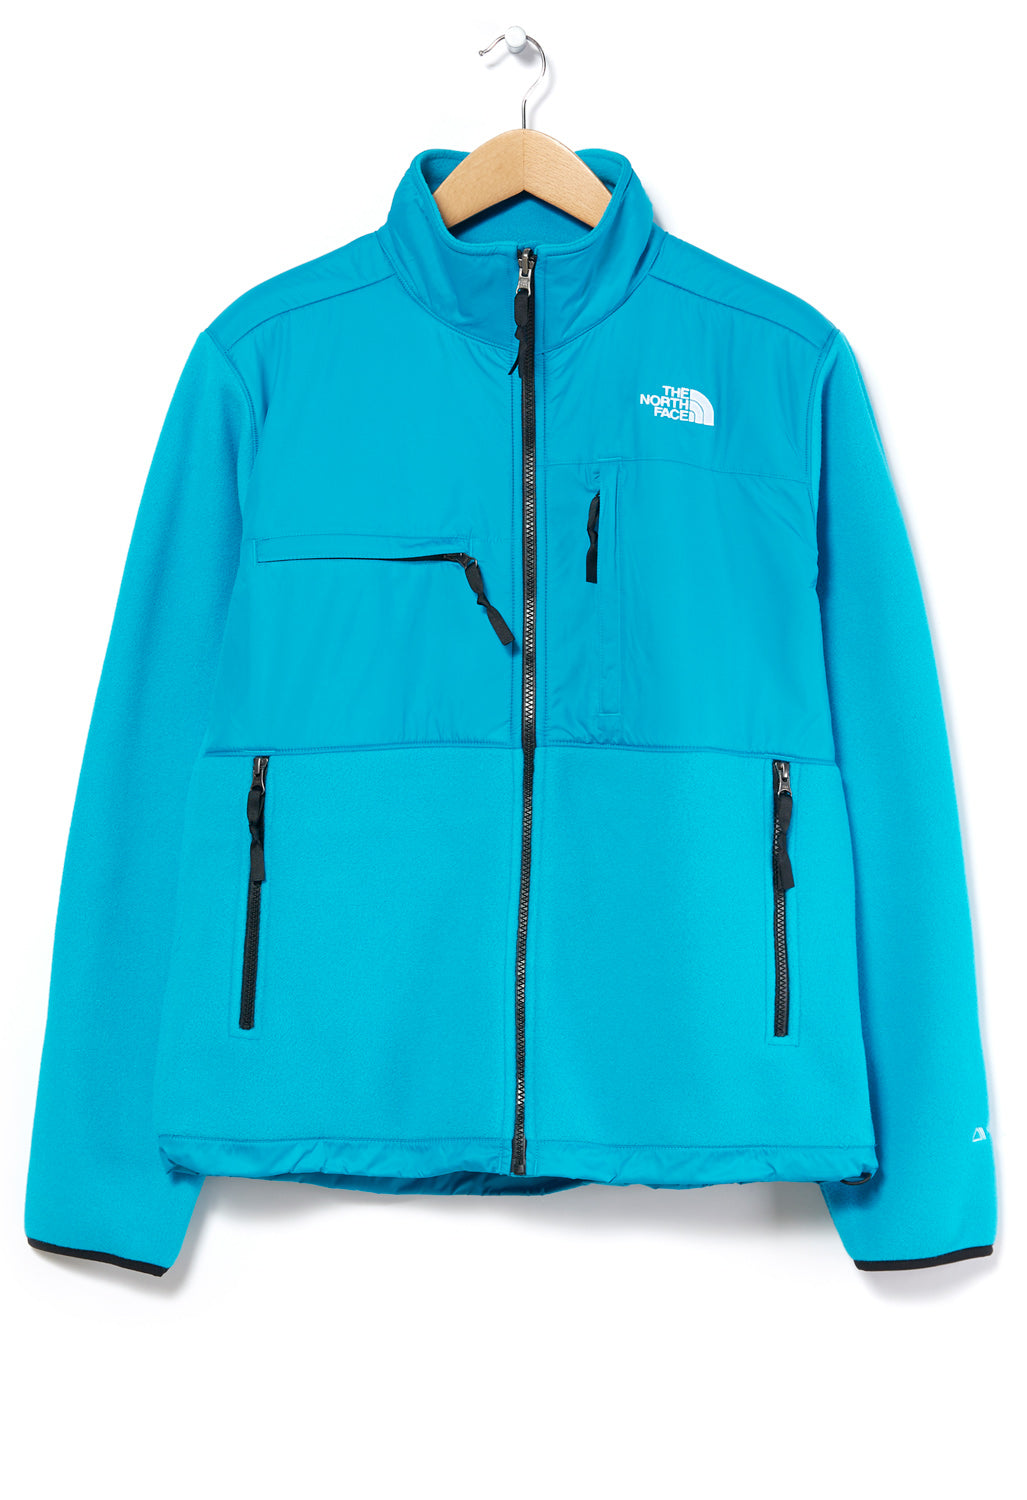 The North Face Denali Men's Jacket - Acoustic Blue – Outsiders Store UK